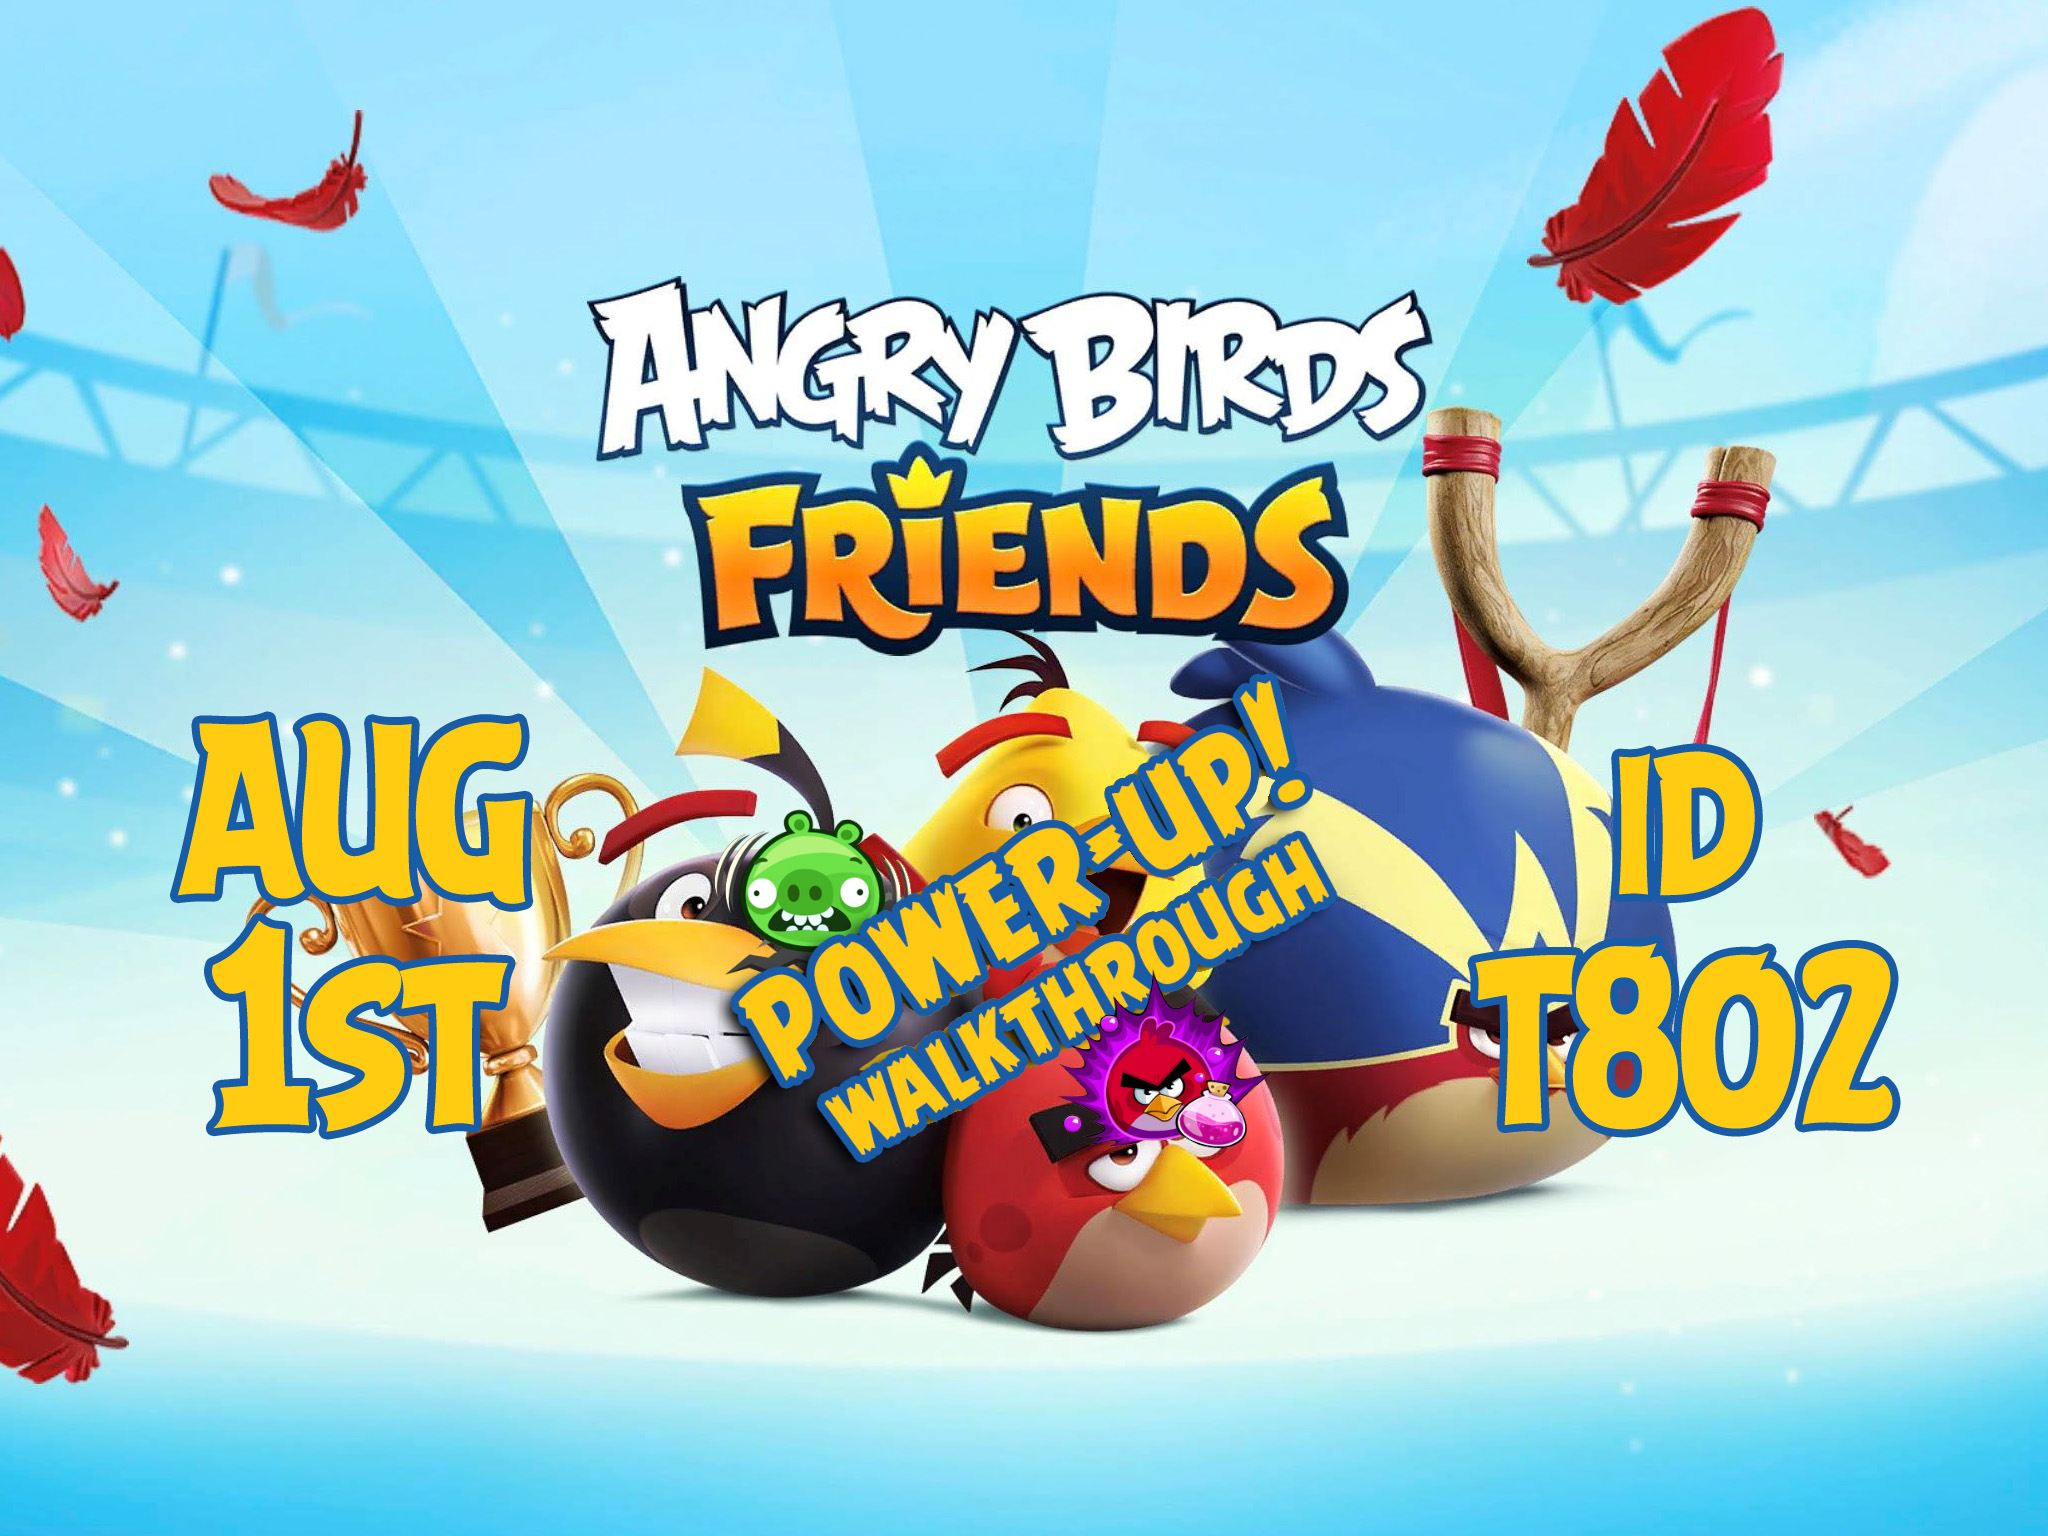 Angry-Birds-Friends-Tournament-T802-Feature-Image-PU